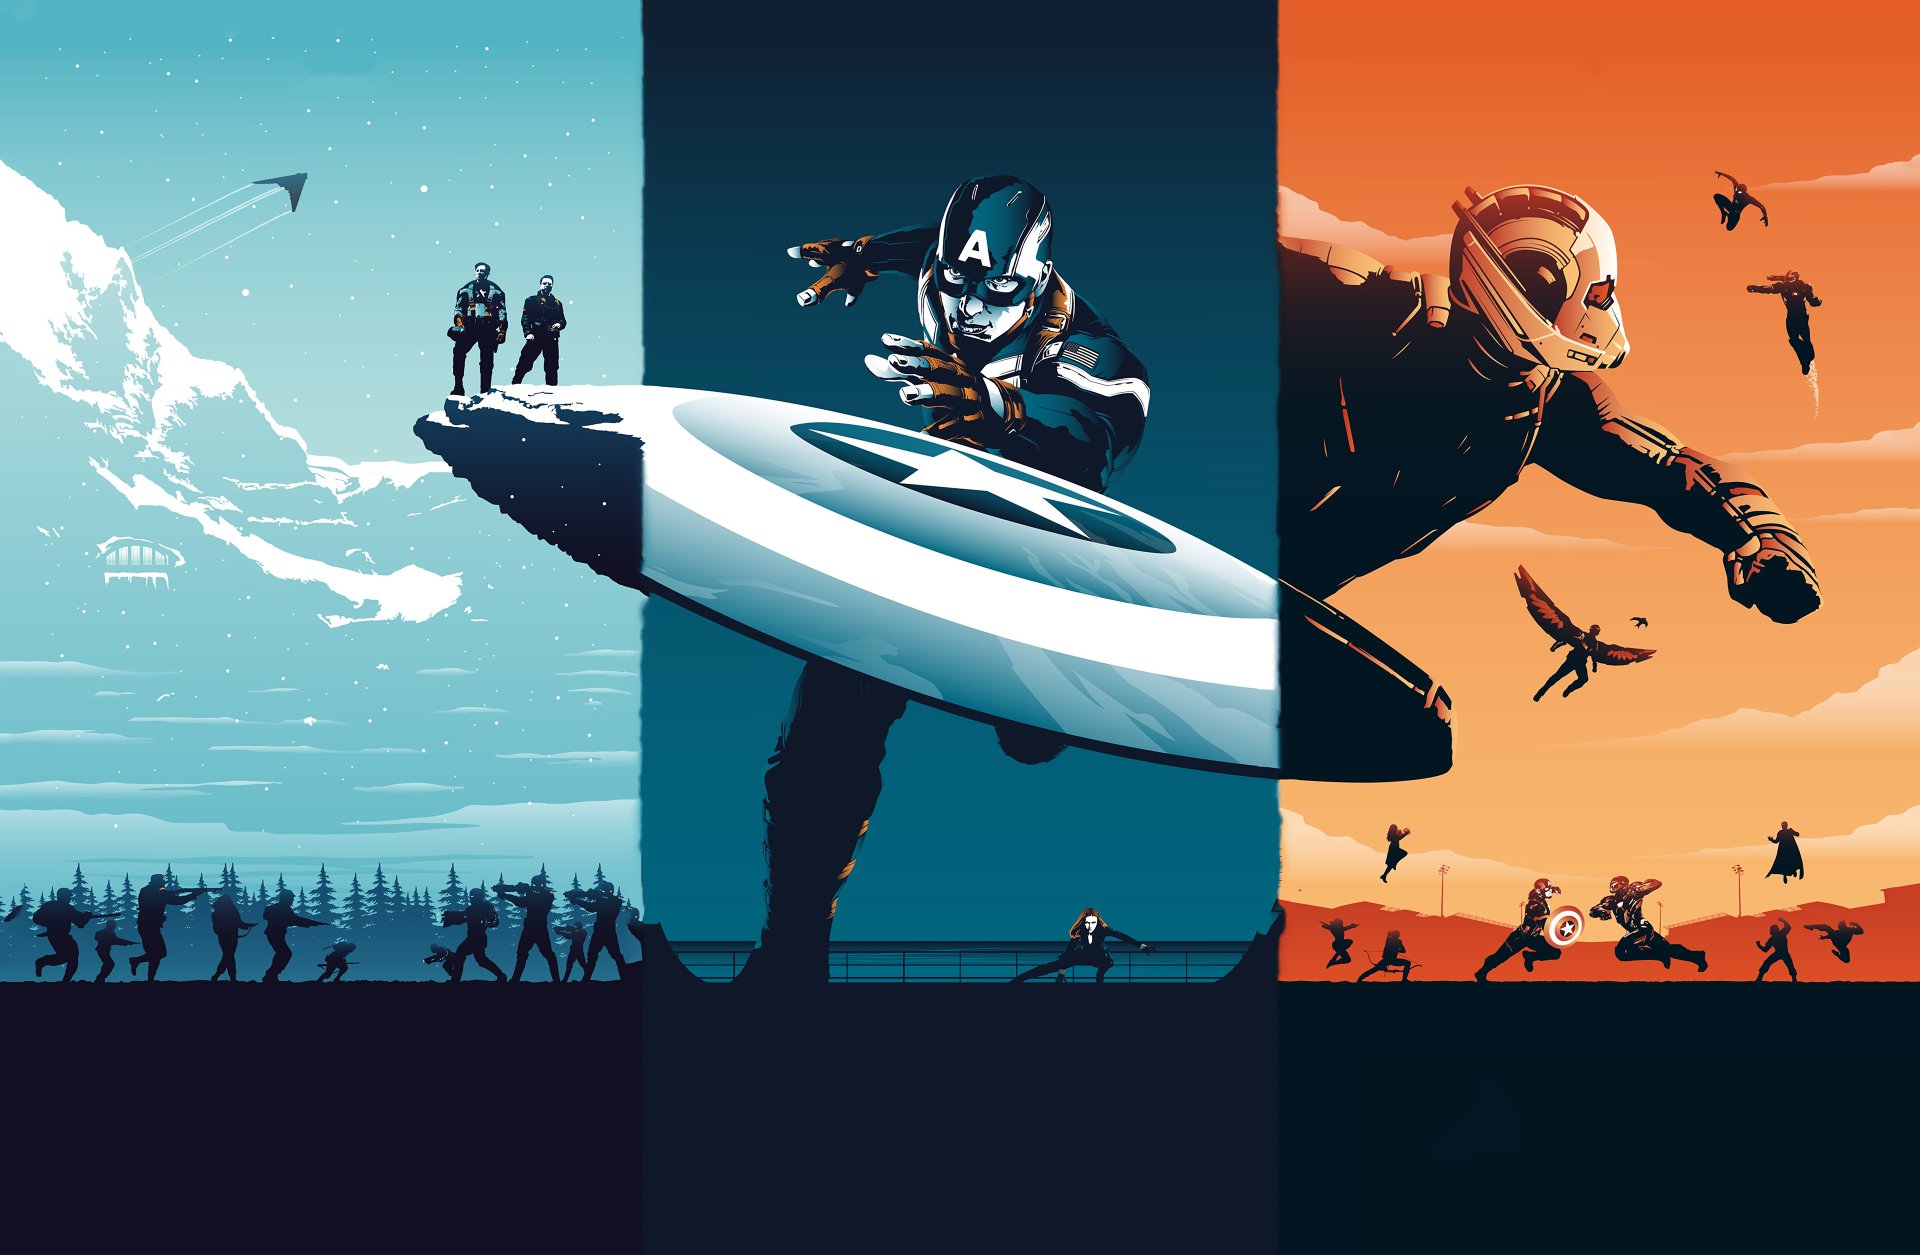 Captain America: The Winter Soldier Wallpapers